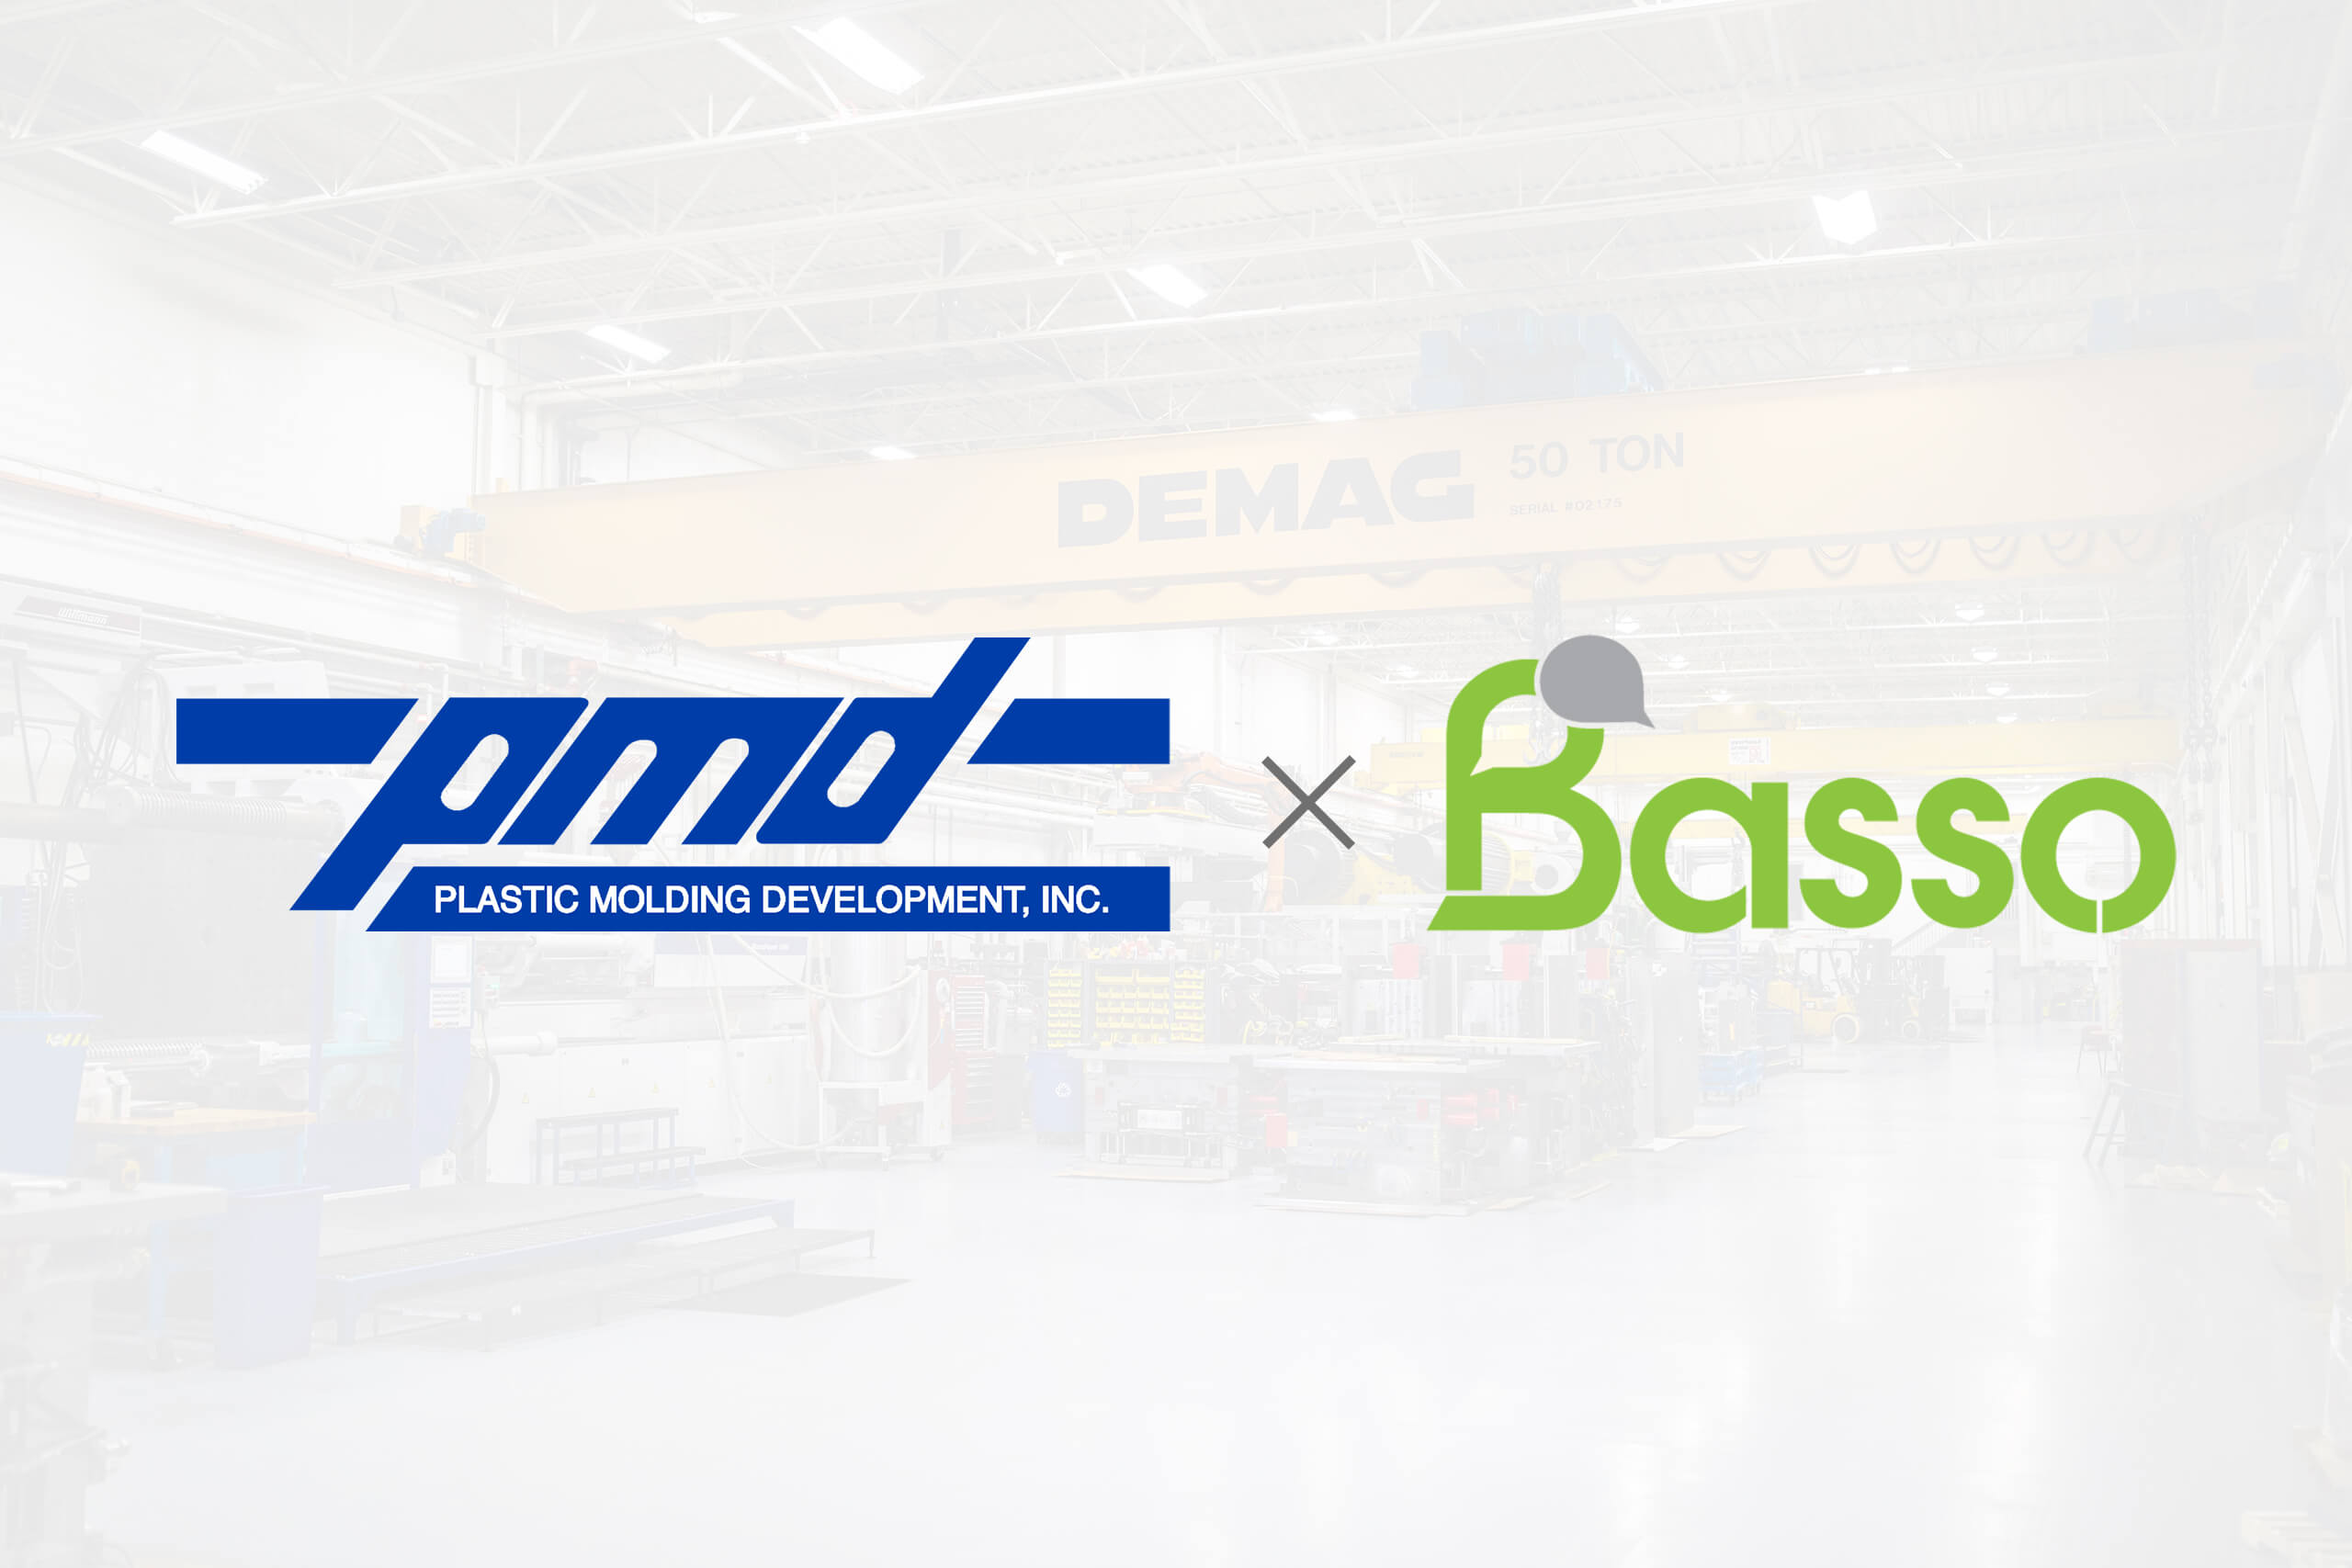 Sterling Heights, Michigan-based Plastic Molding Development launches its website, created by Basso.